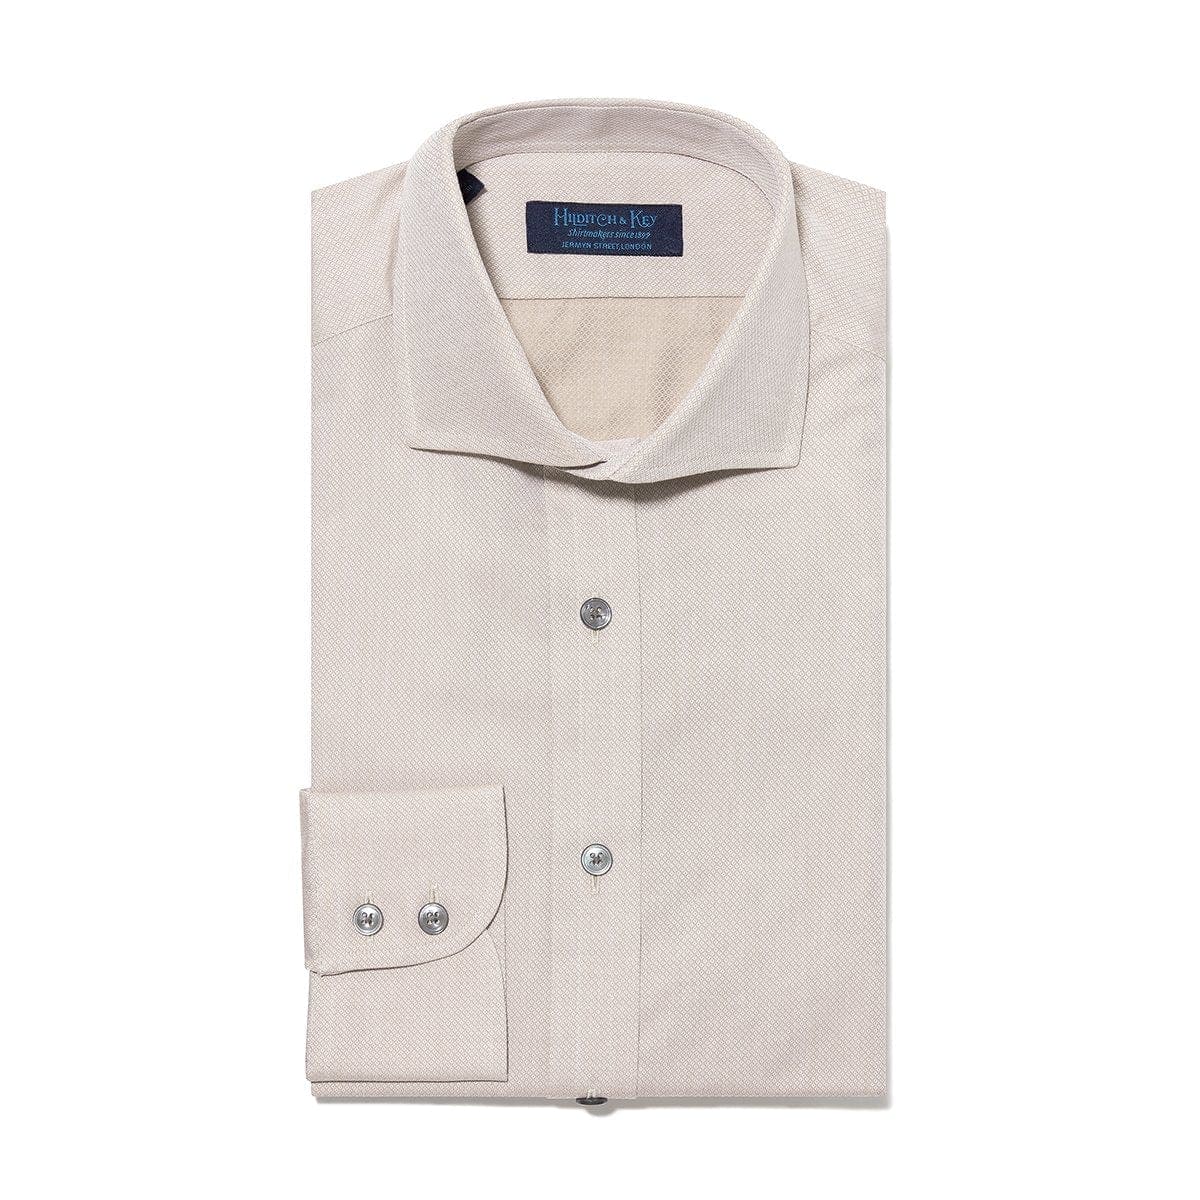 Contemporary Fit, Cut-away Collar, 2 Button Cuff Shirt in a Brown & White Textured Twill Cotton